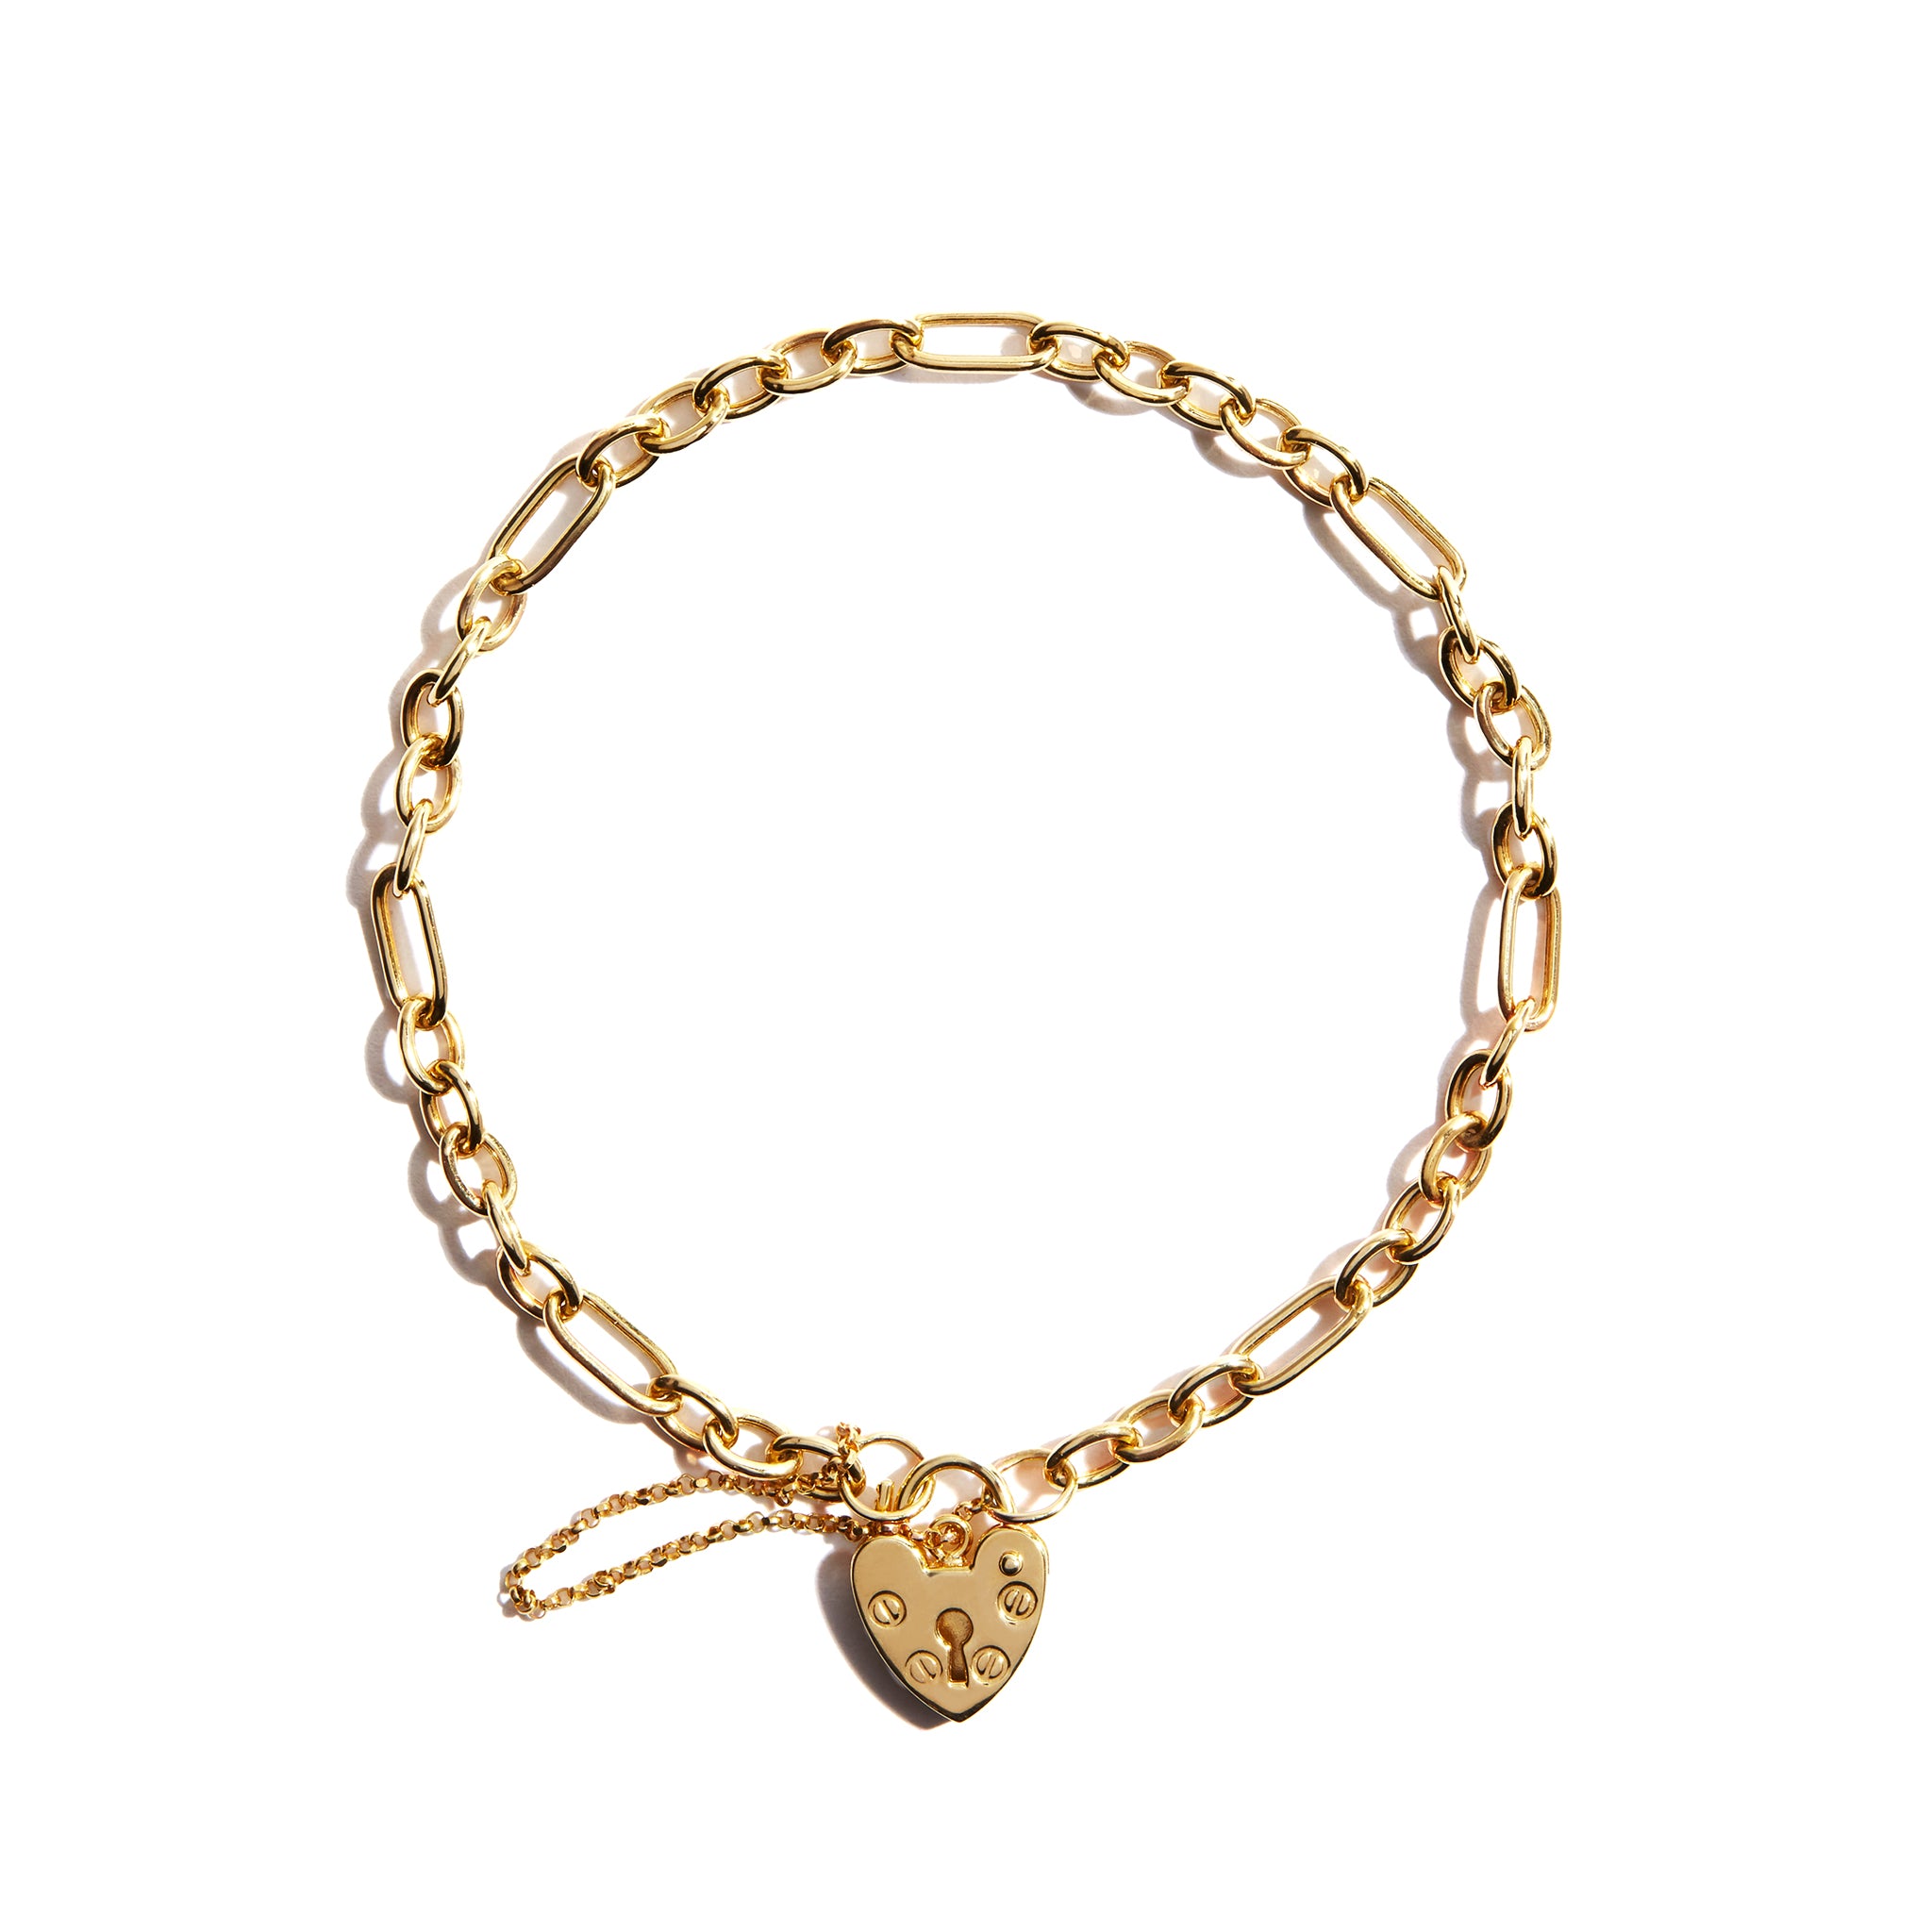 This beautiful 9ct gold bracelet features an intricate belcher heart link design. Enjoy the rich classic look of this bracelet crafted 9 carat solid gold. Wear this elegant piece alone or stack it with other bracelets to create a stylish look.